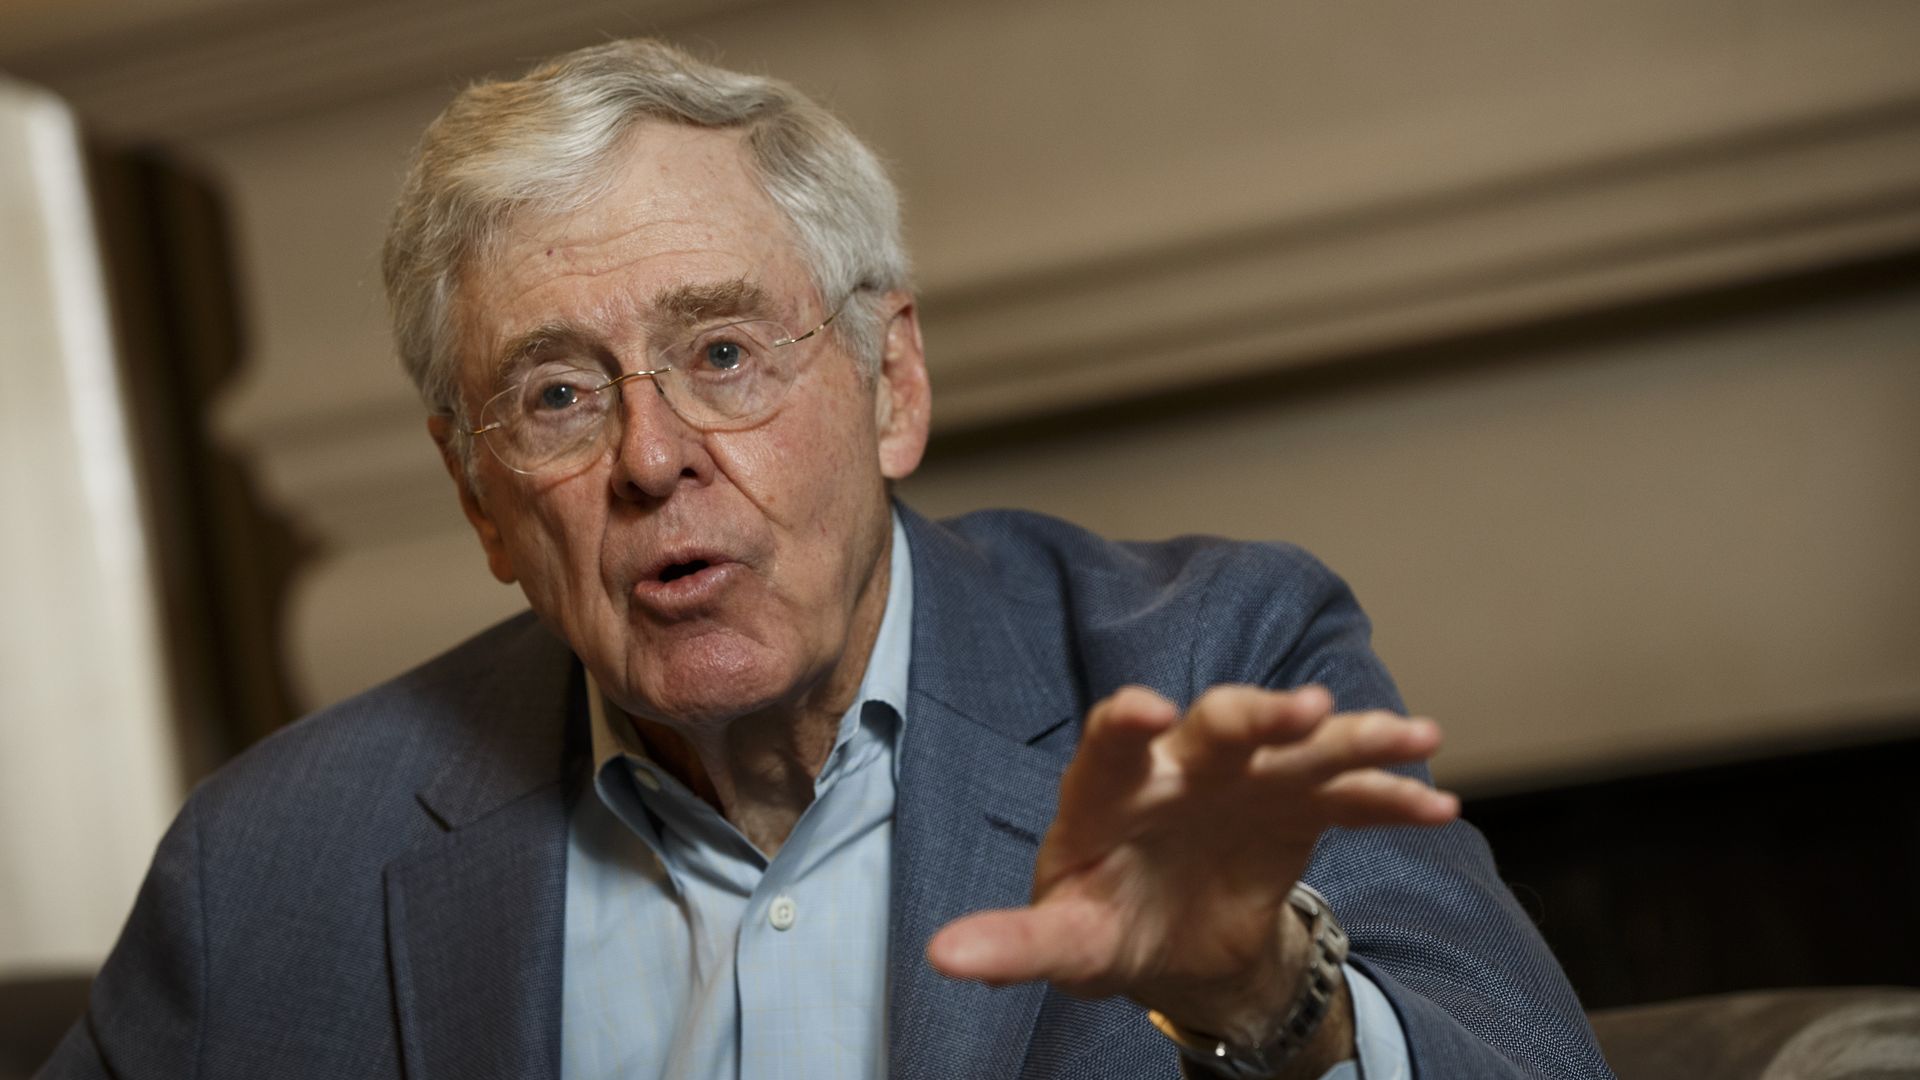 Charles Koch speaking, gesturing outward with his left hand